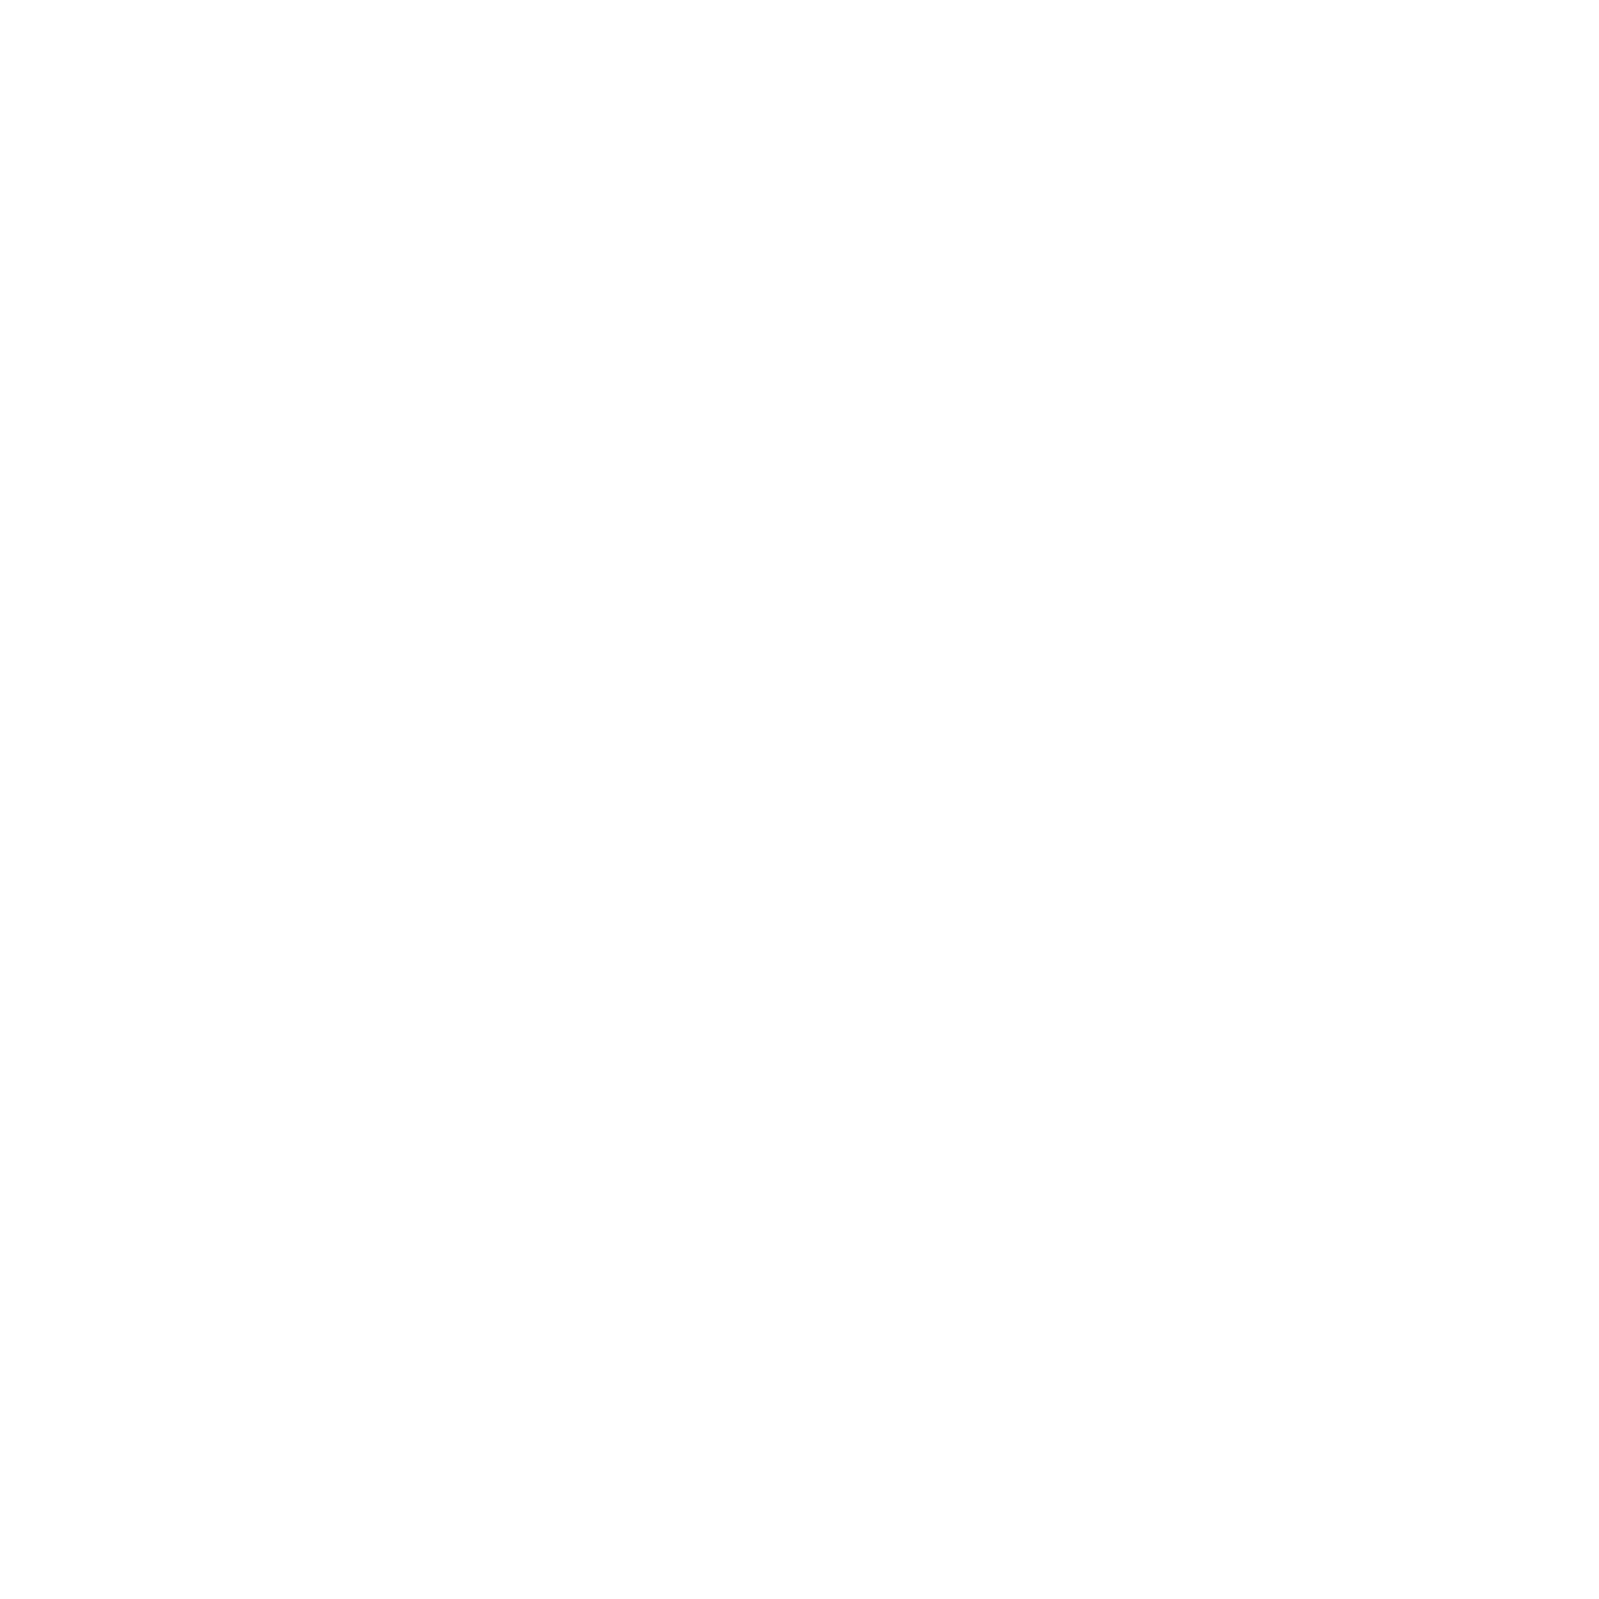 Equitable Learning Technology Lab